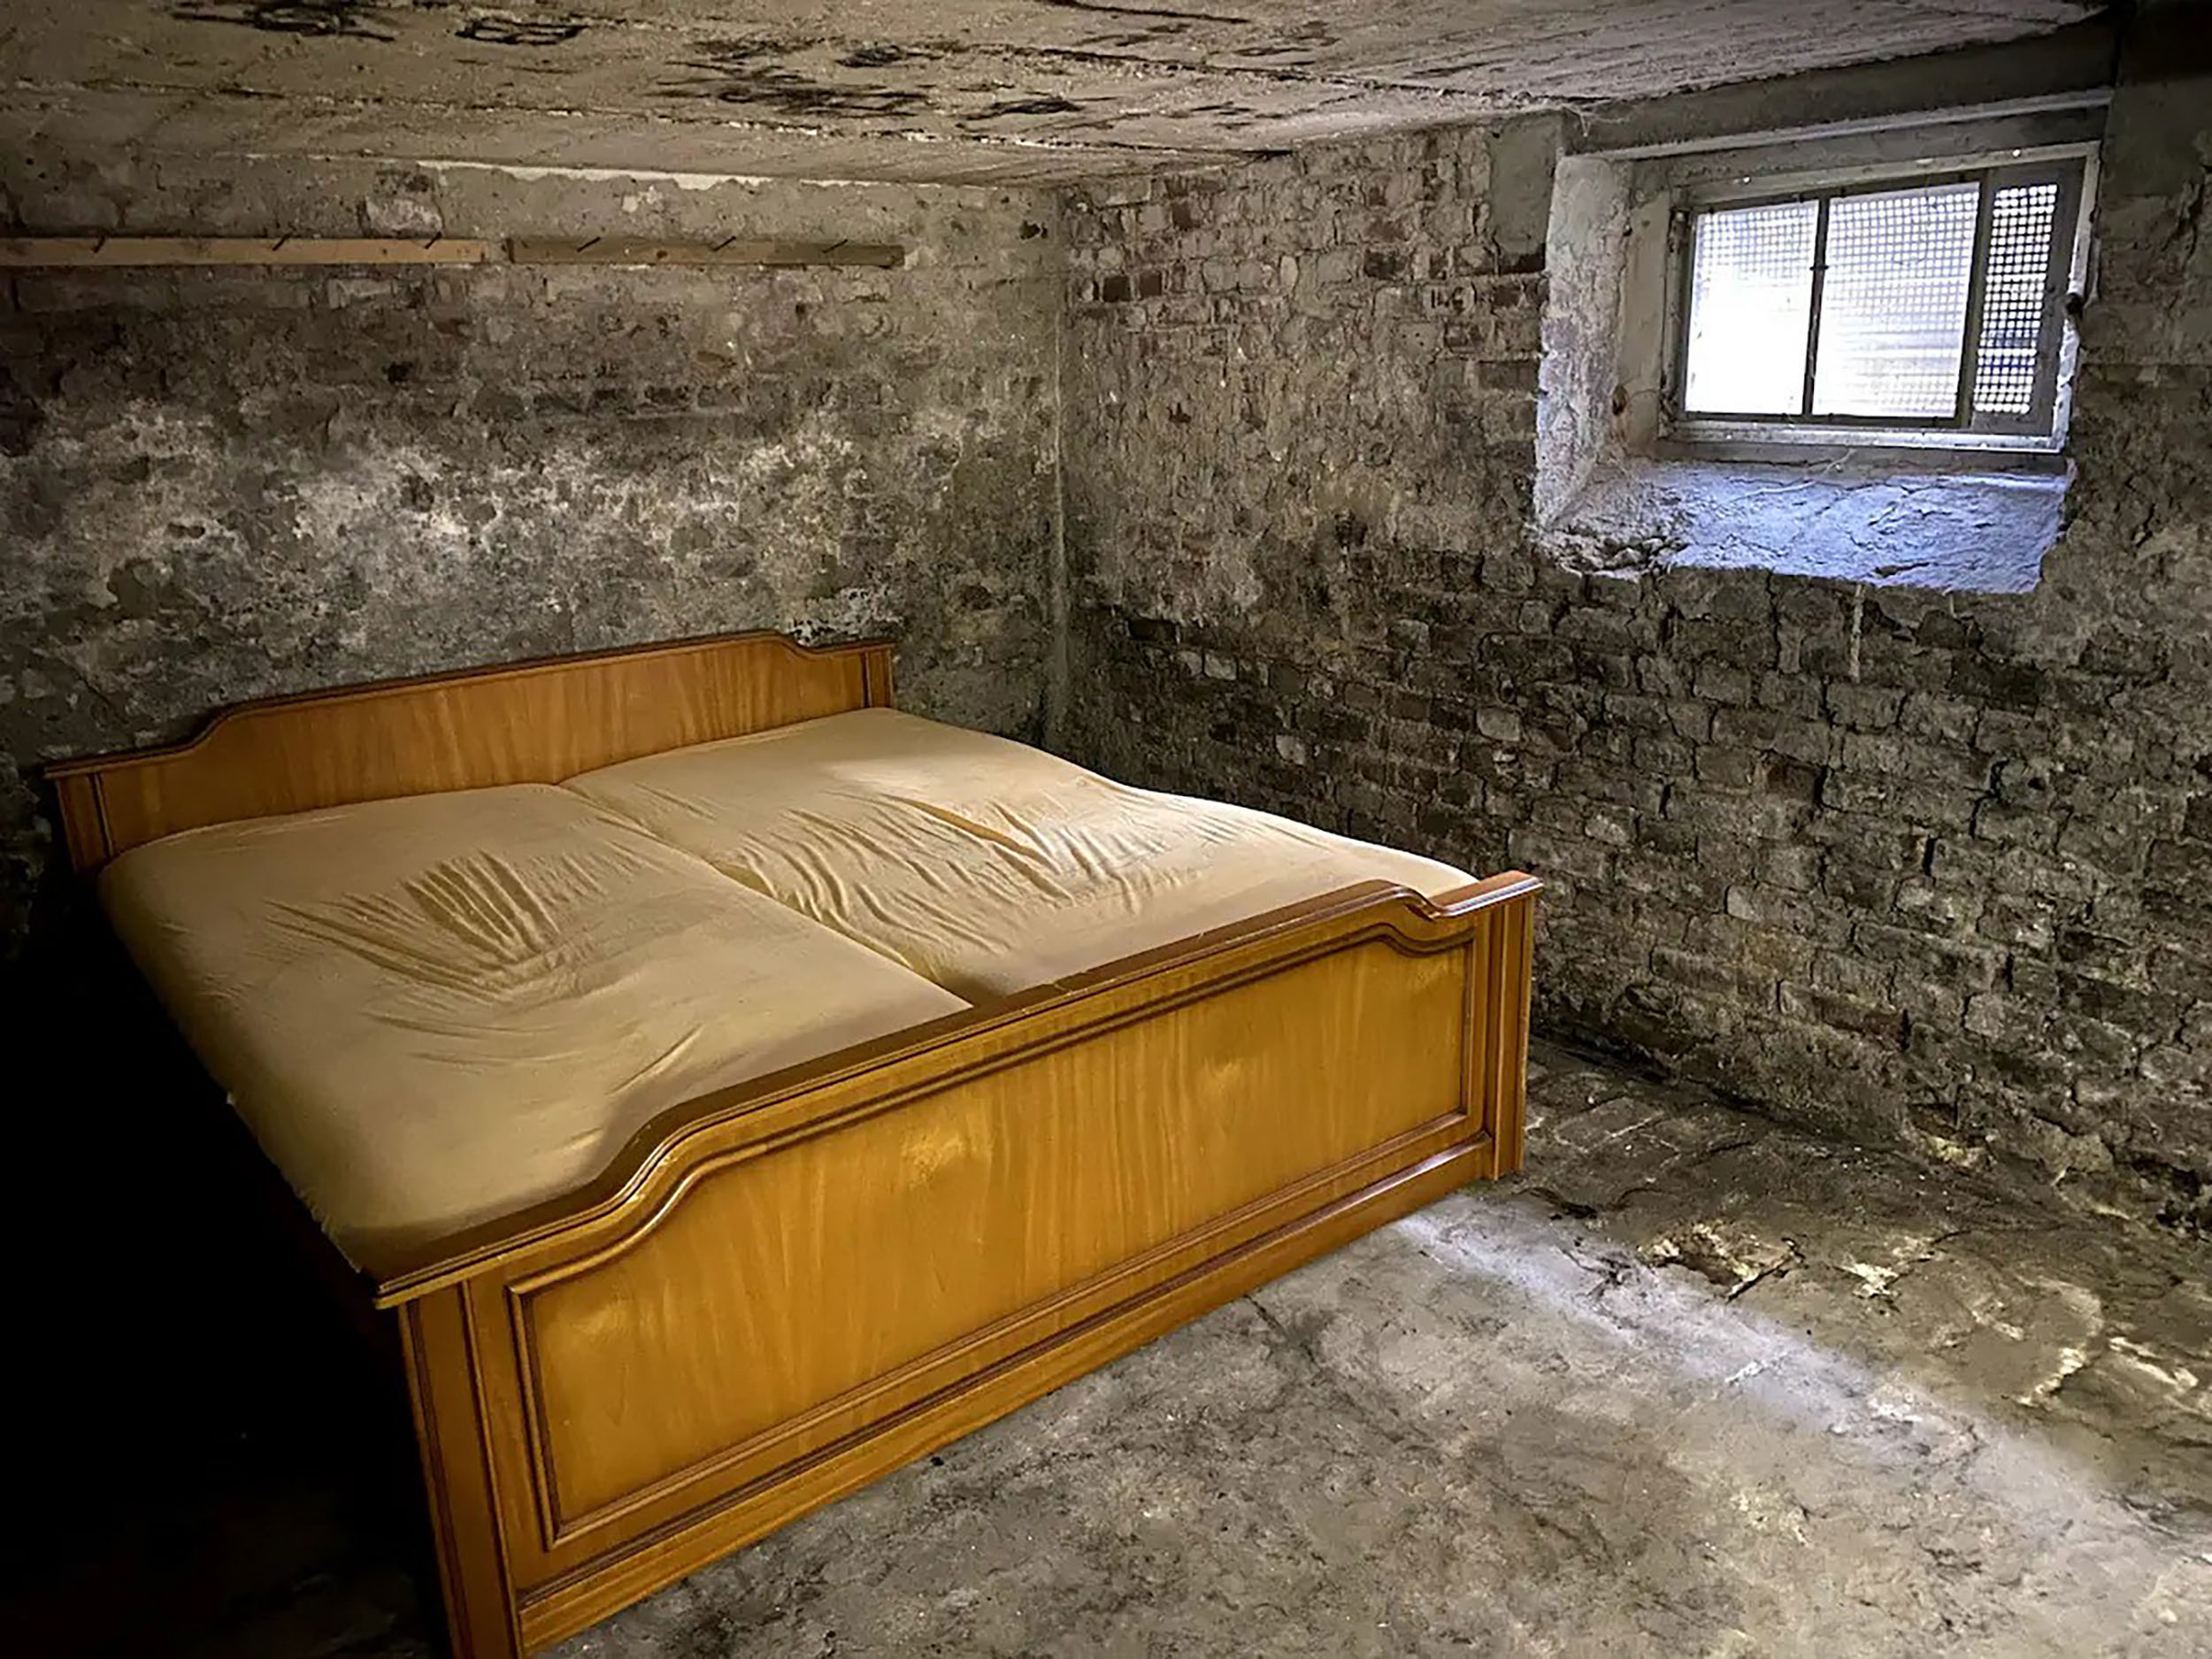 England fans can spend Euro 2024 staying in a drab bunker — for just £26 per night